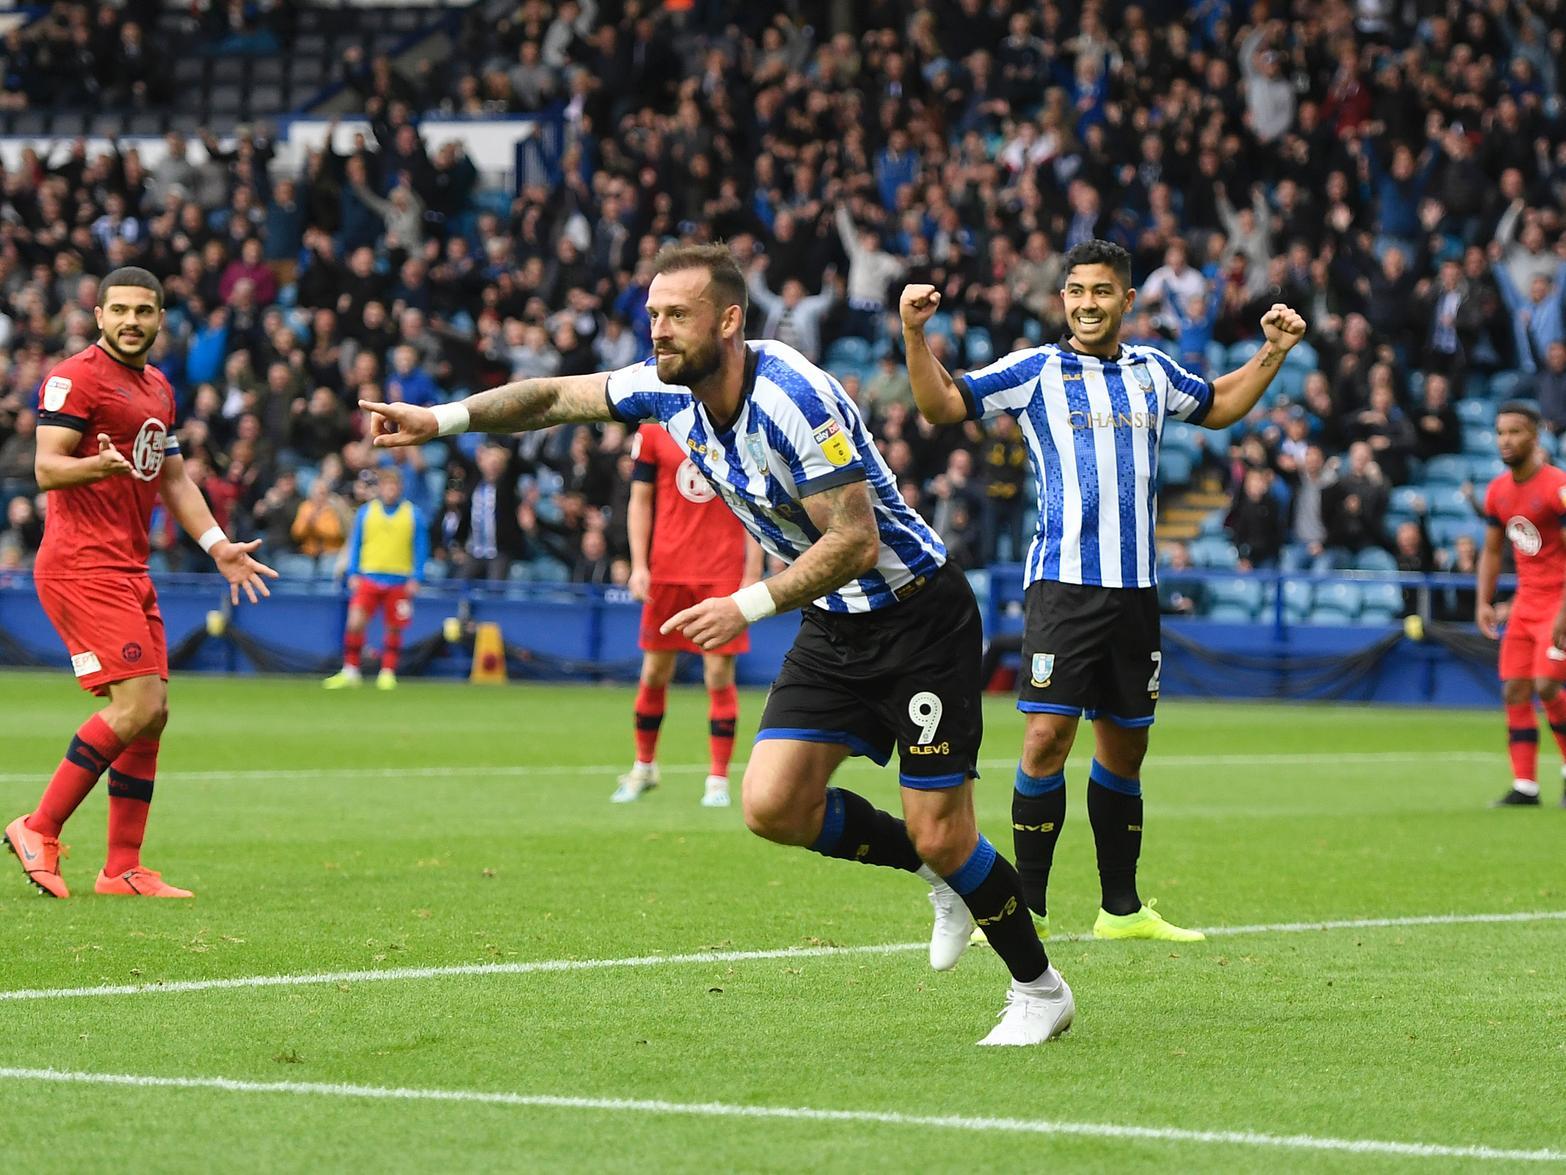 Sheffield Wednesday have received a double boost ahead of their clash against Birmingham City, with star striker Steven Fletcher and key defender Morgan Fox both potentially returning from injury. (Sheffield Star)